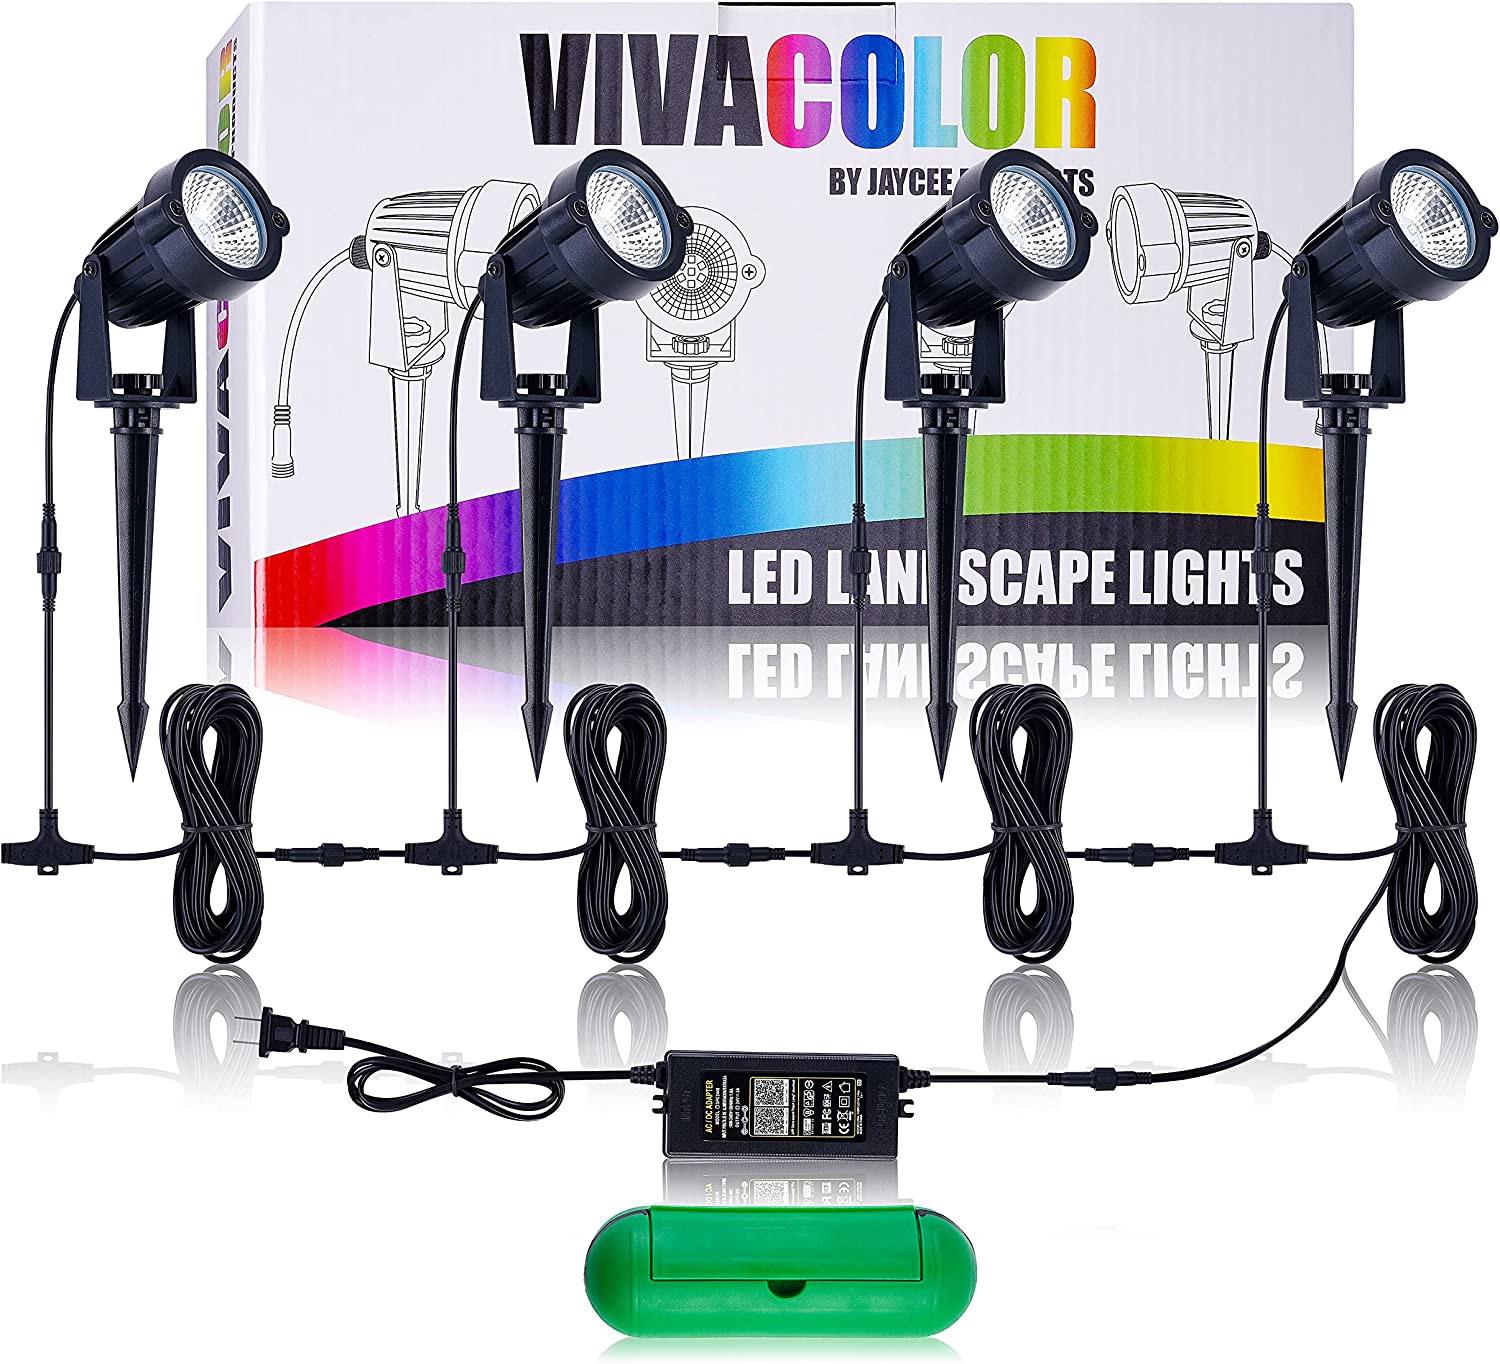 4 LED flood lights in front of the package